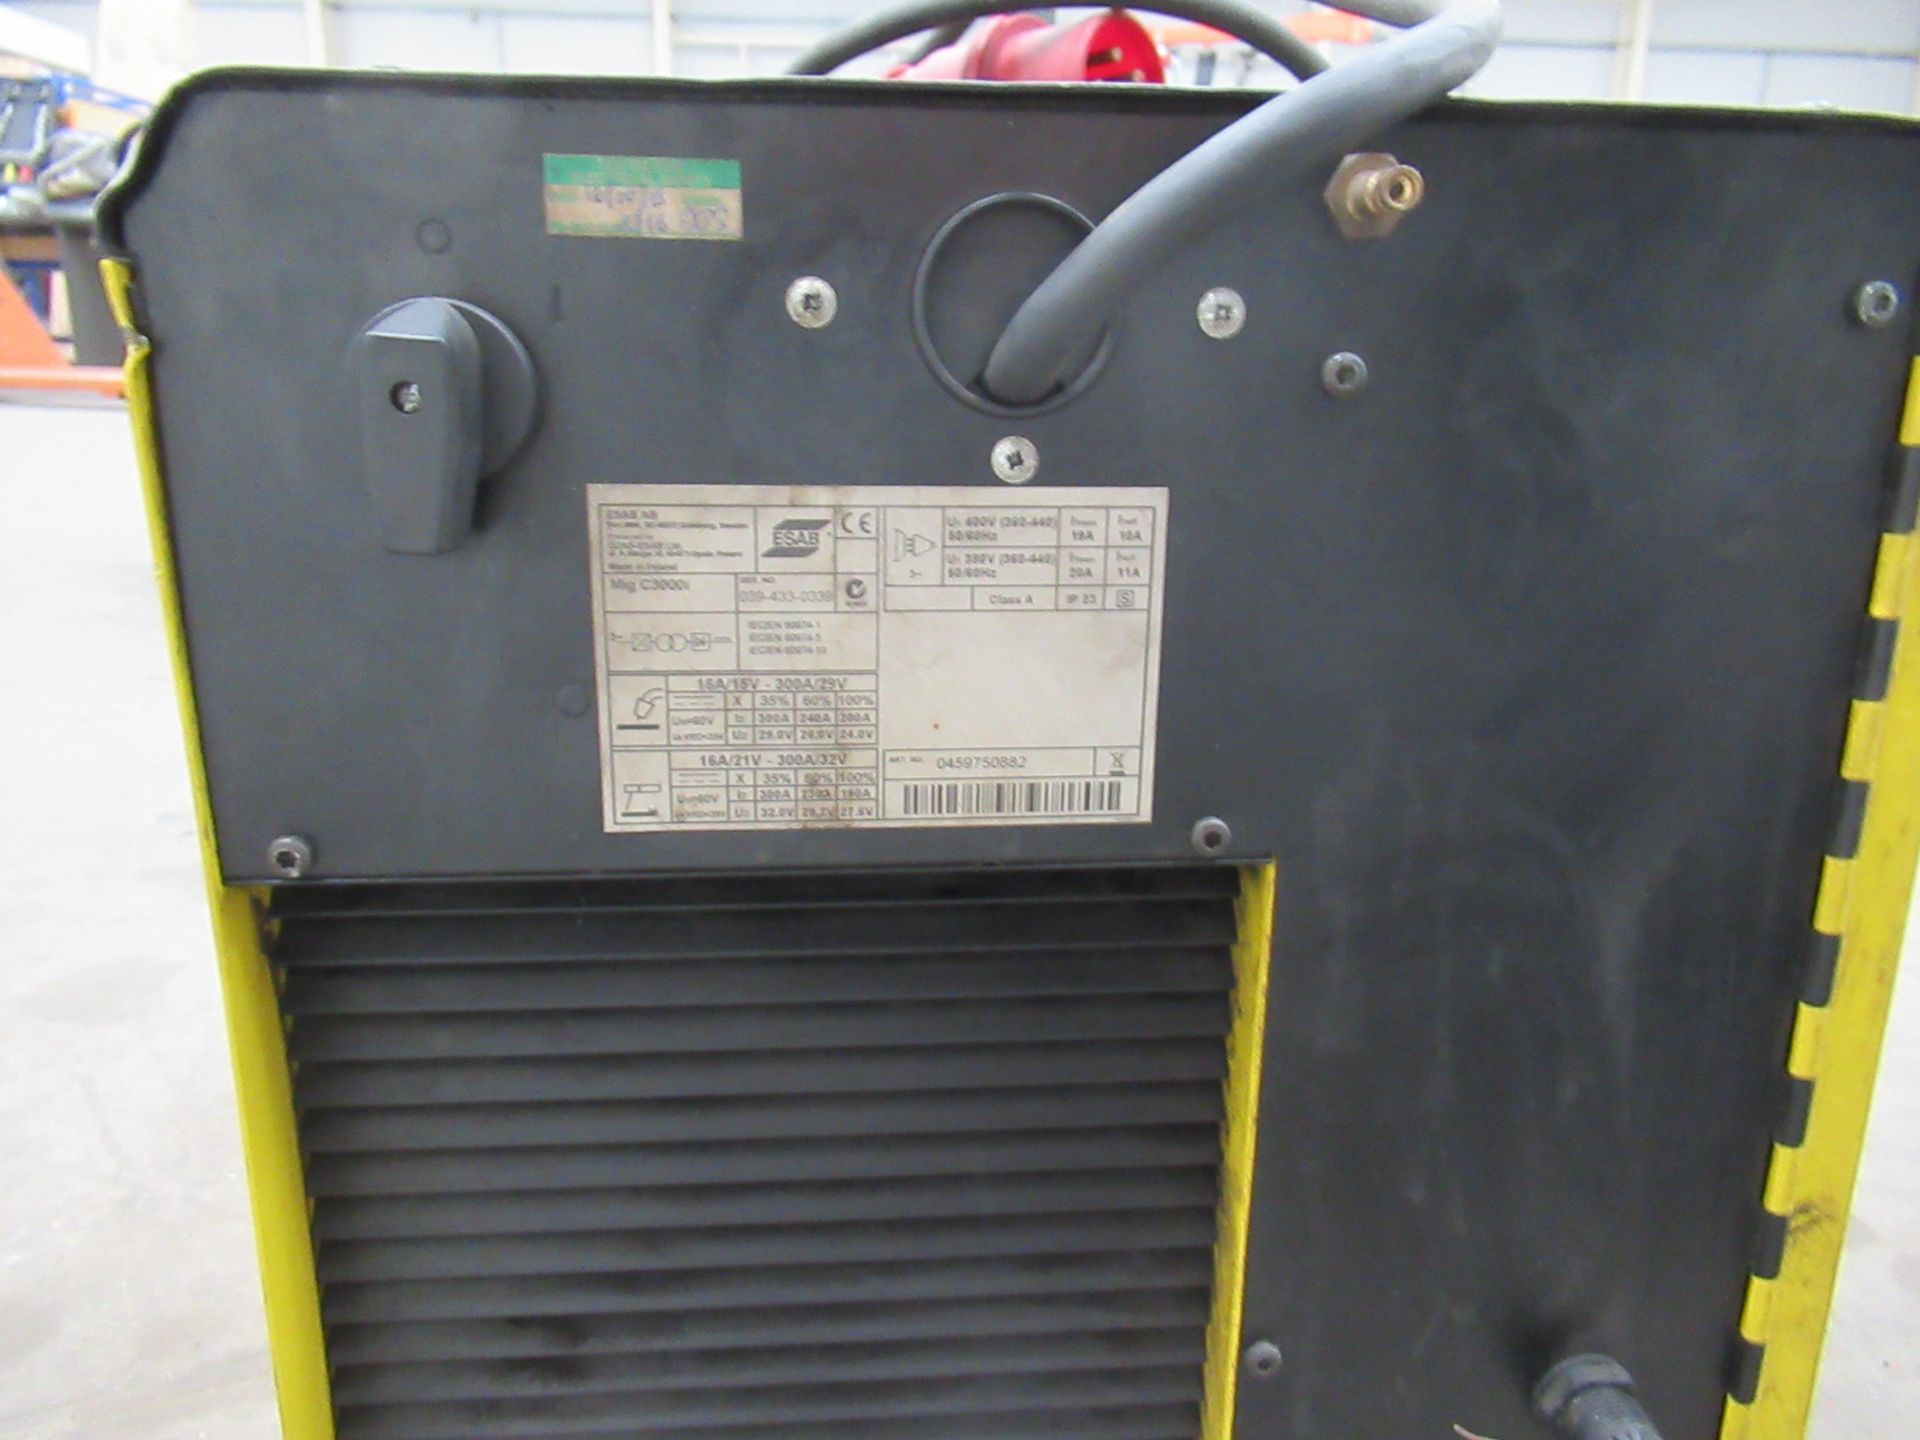 E5aB MiG C3000i Aristo MiG welder and built in wire feed - Image 4 of 6